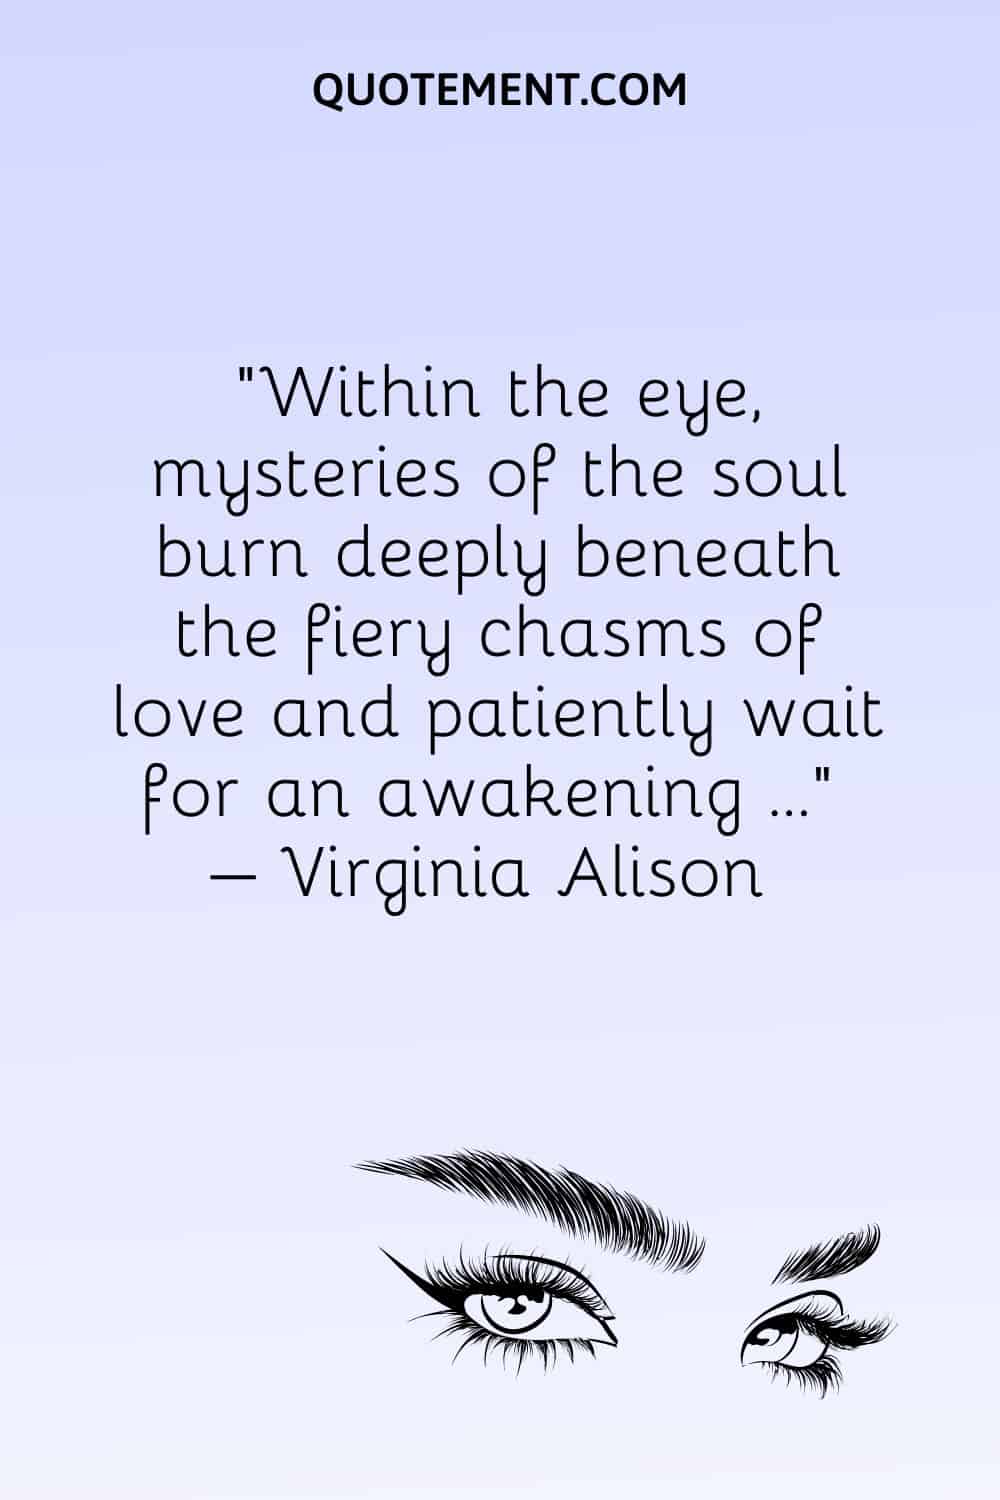 Within the eye, mysteries of the soul burn deeply beneath the fiery chasms of love and patiently wait for an awakening